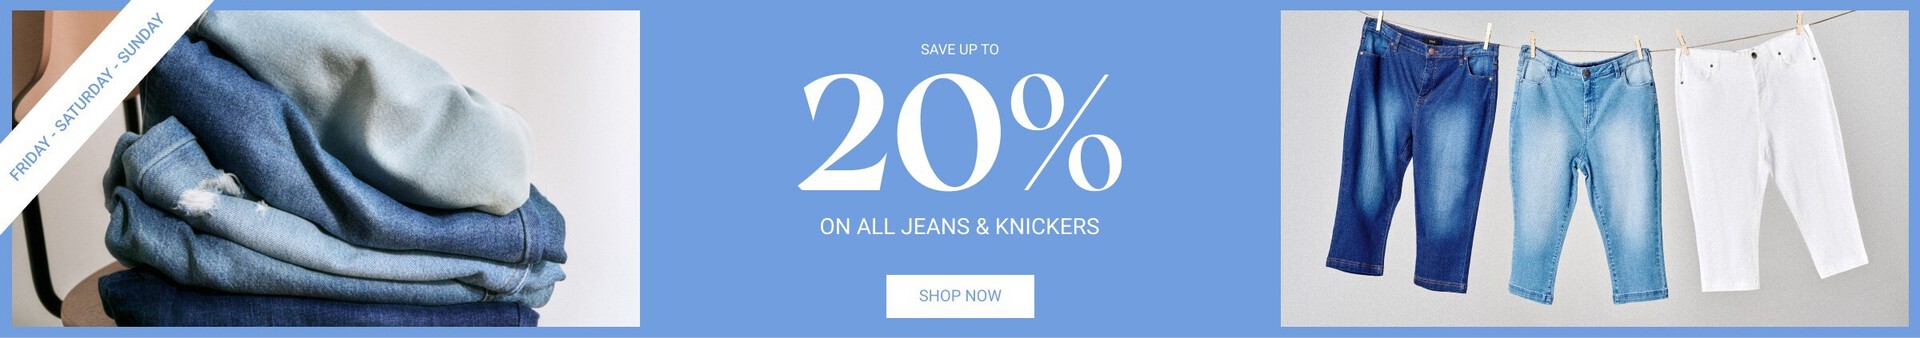 20% on all jeans and knitwear - Zizzi